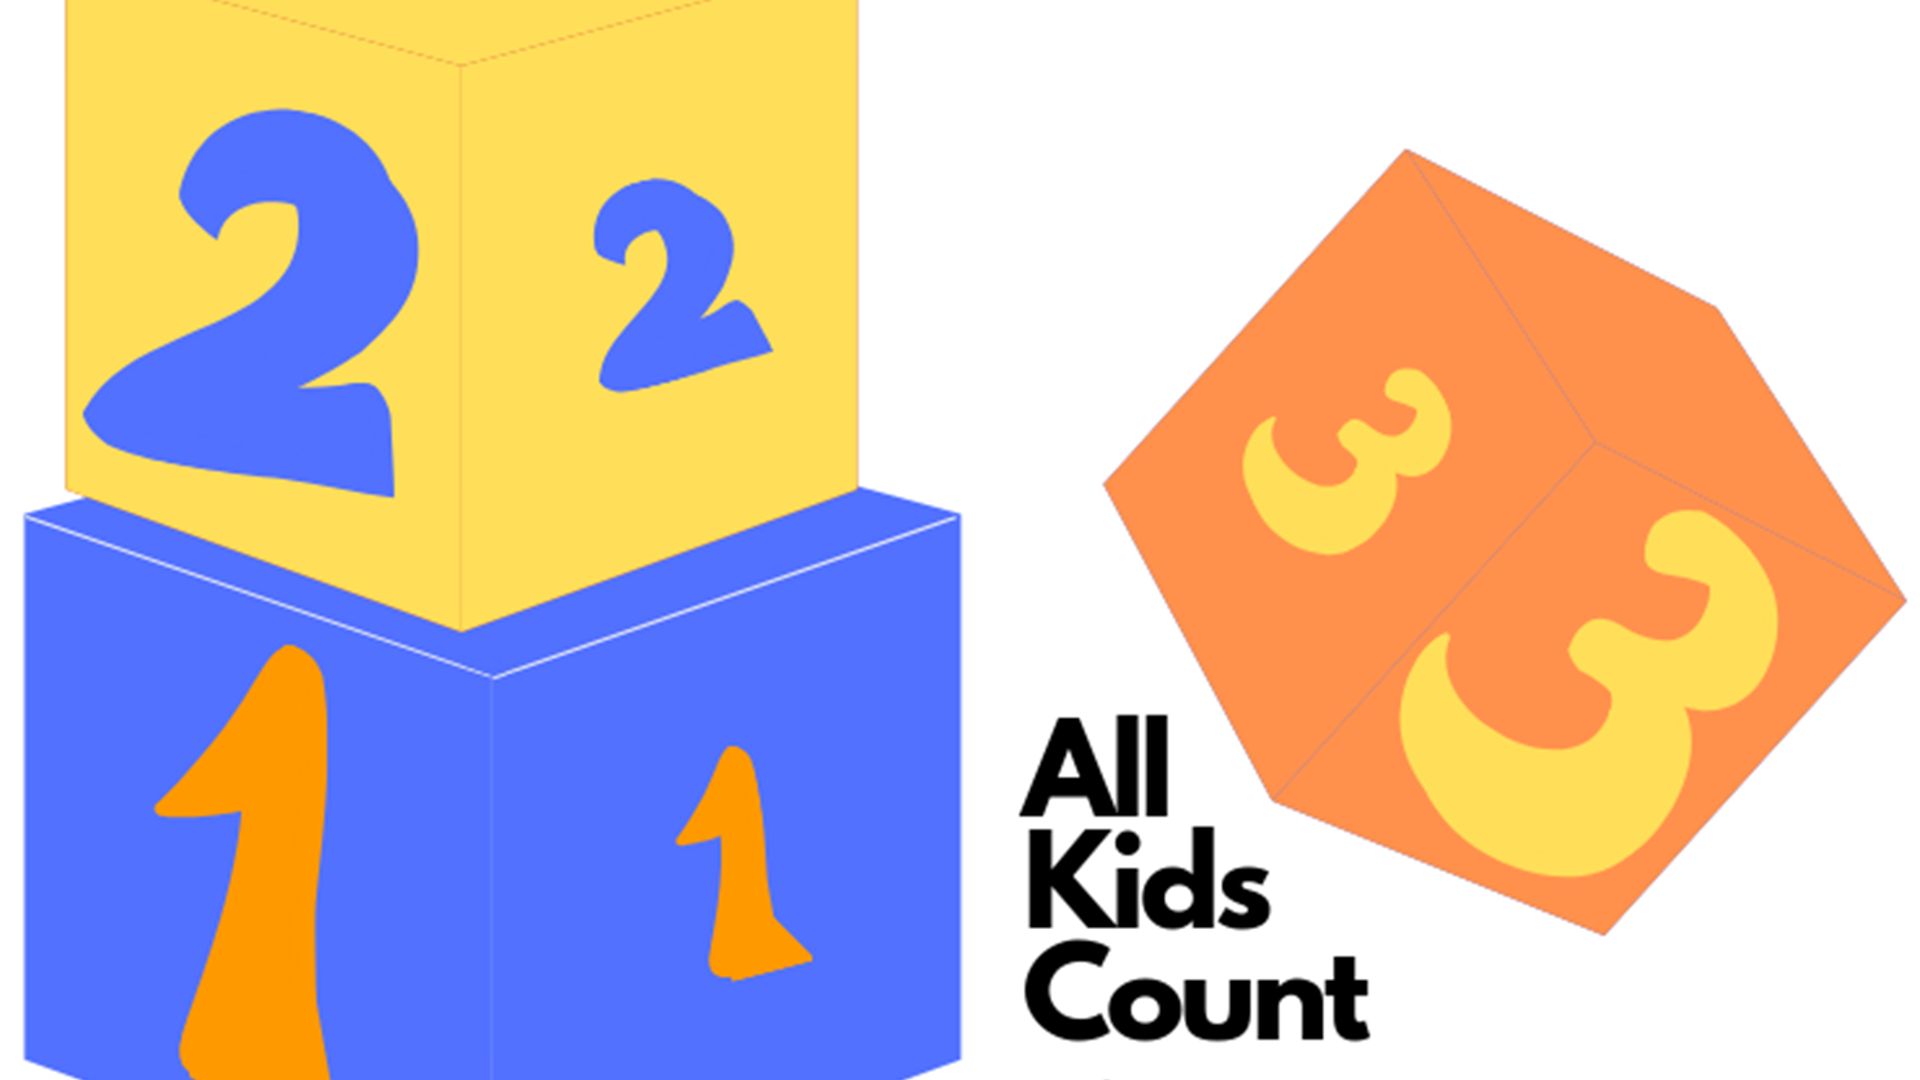 All kids count